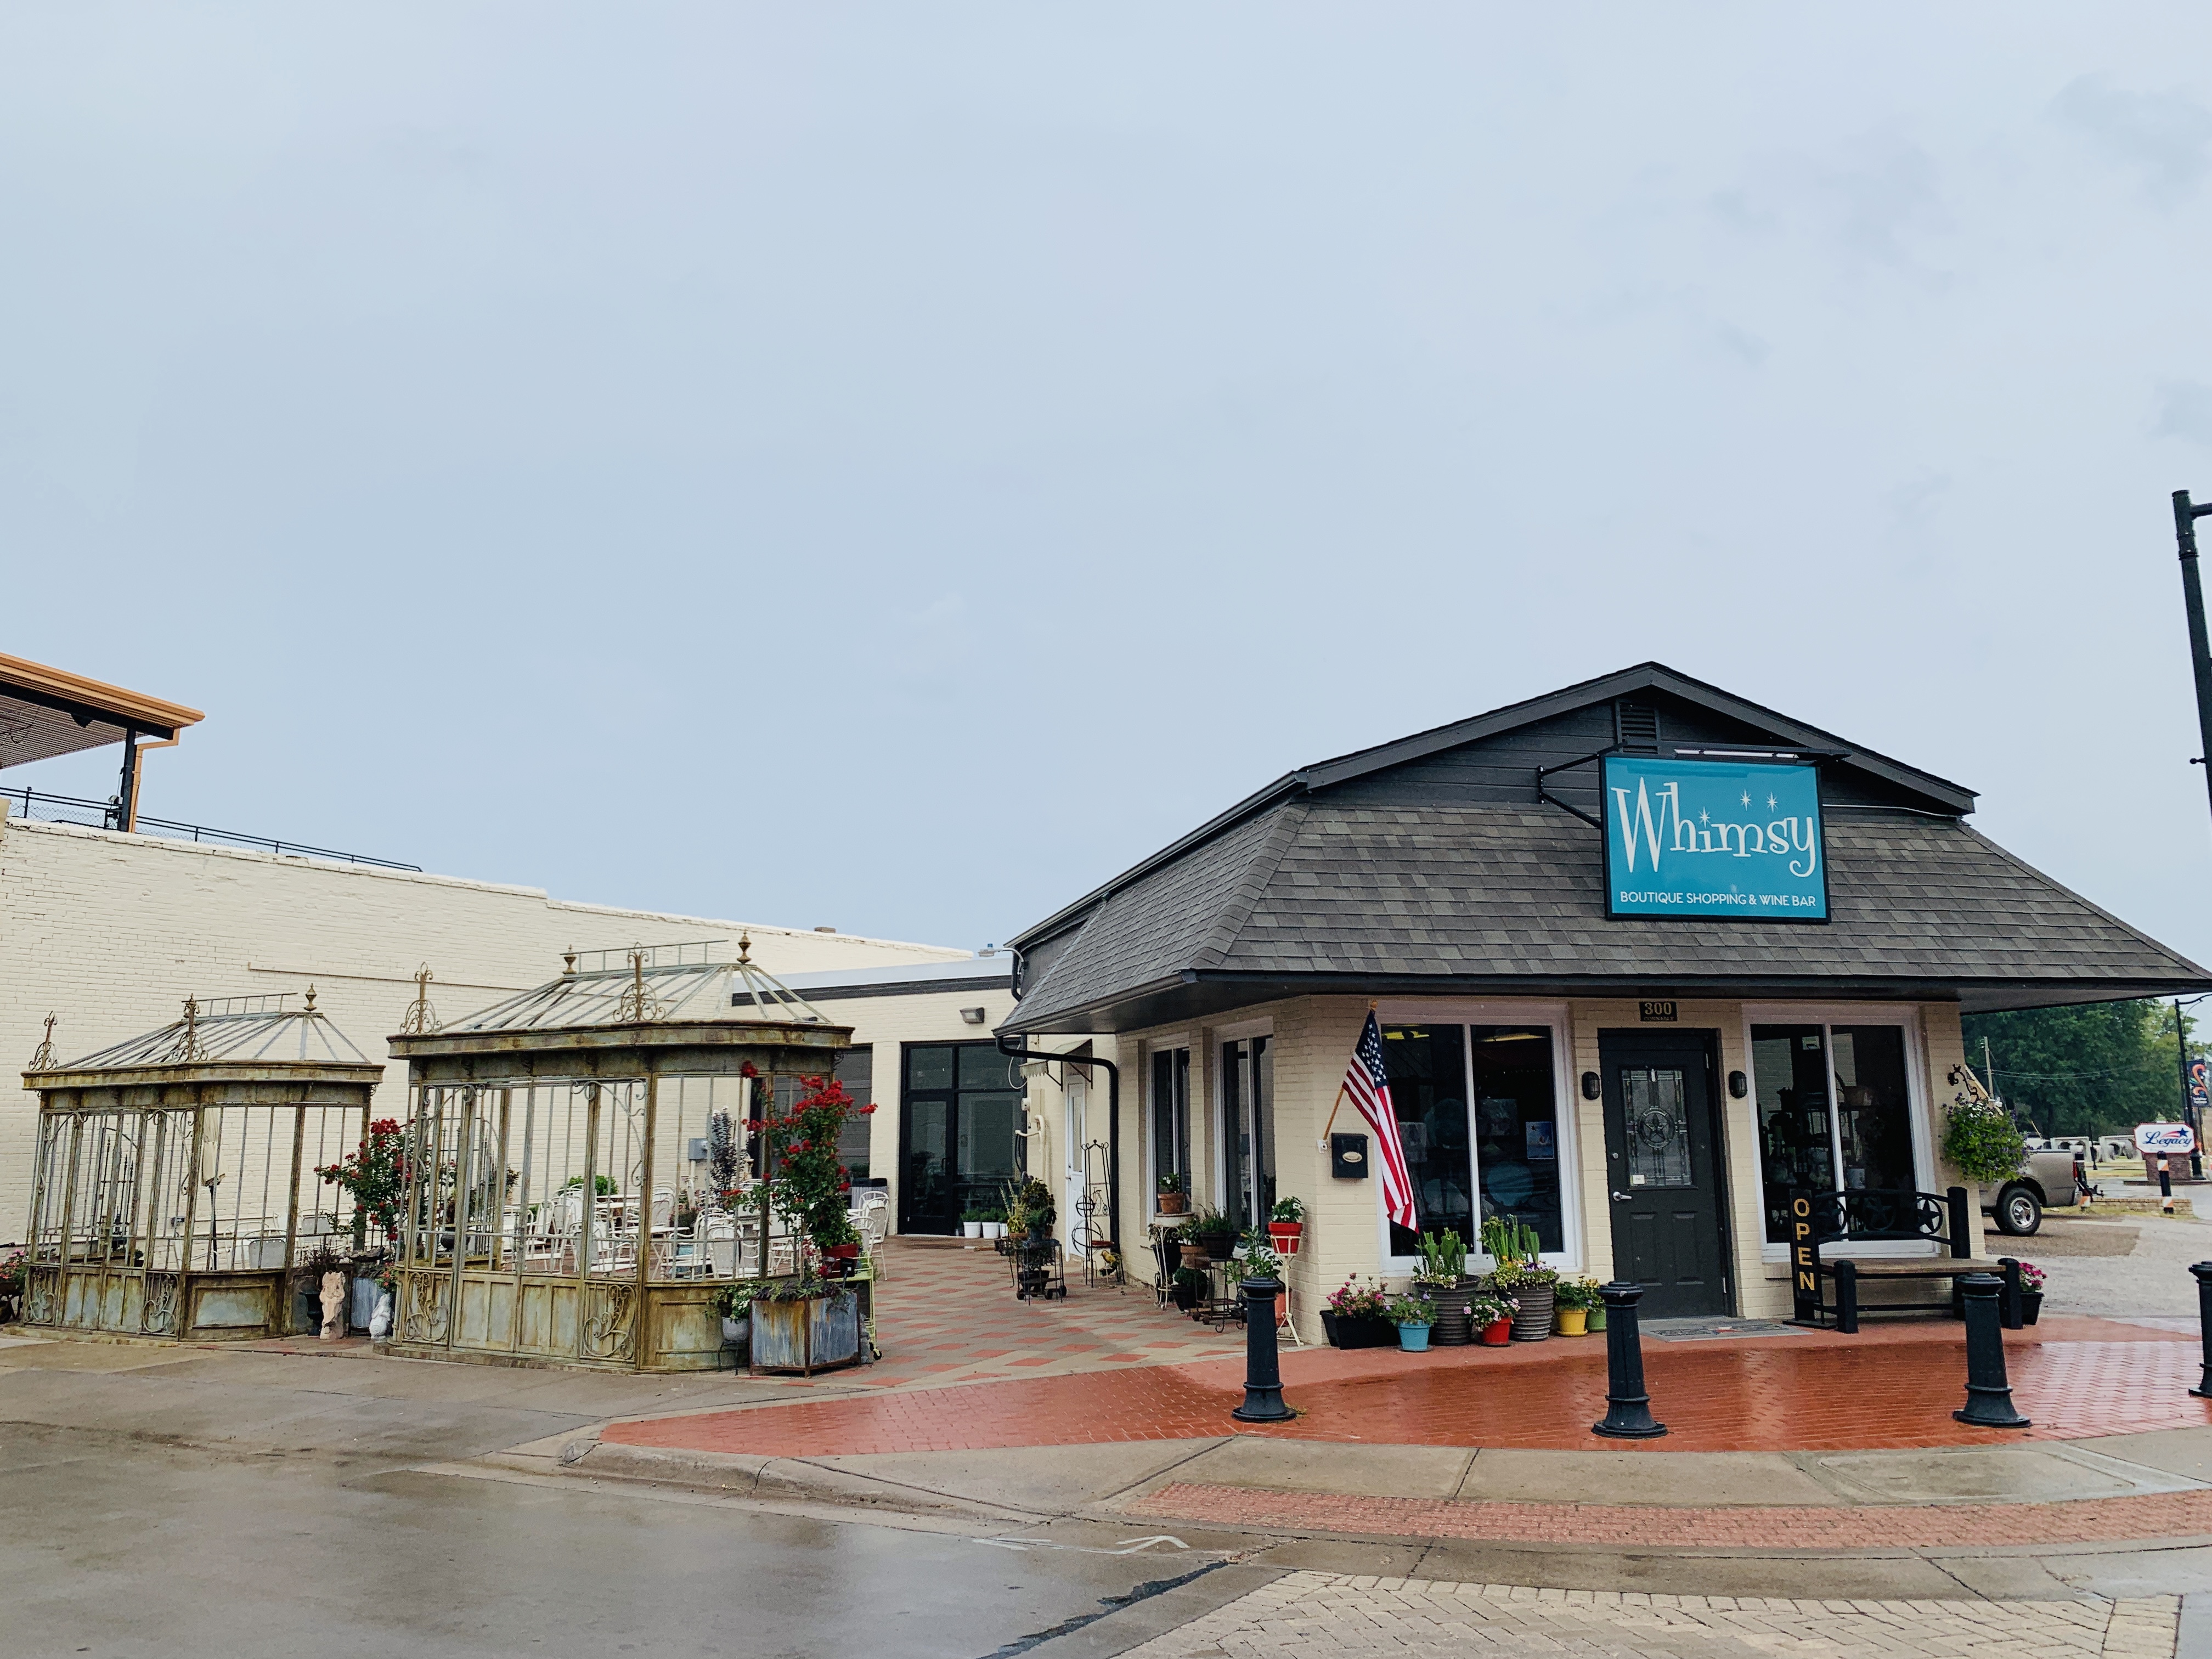 Whimsy, A New Wine Bar On The Sulphur Springs Square, Scheduled to Open August 13th